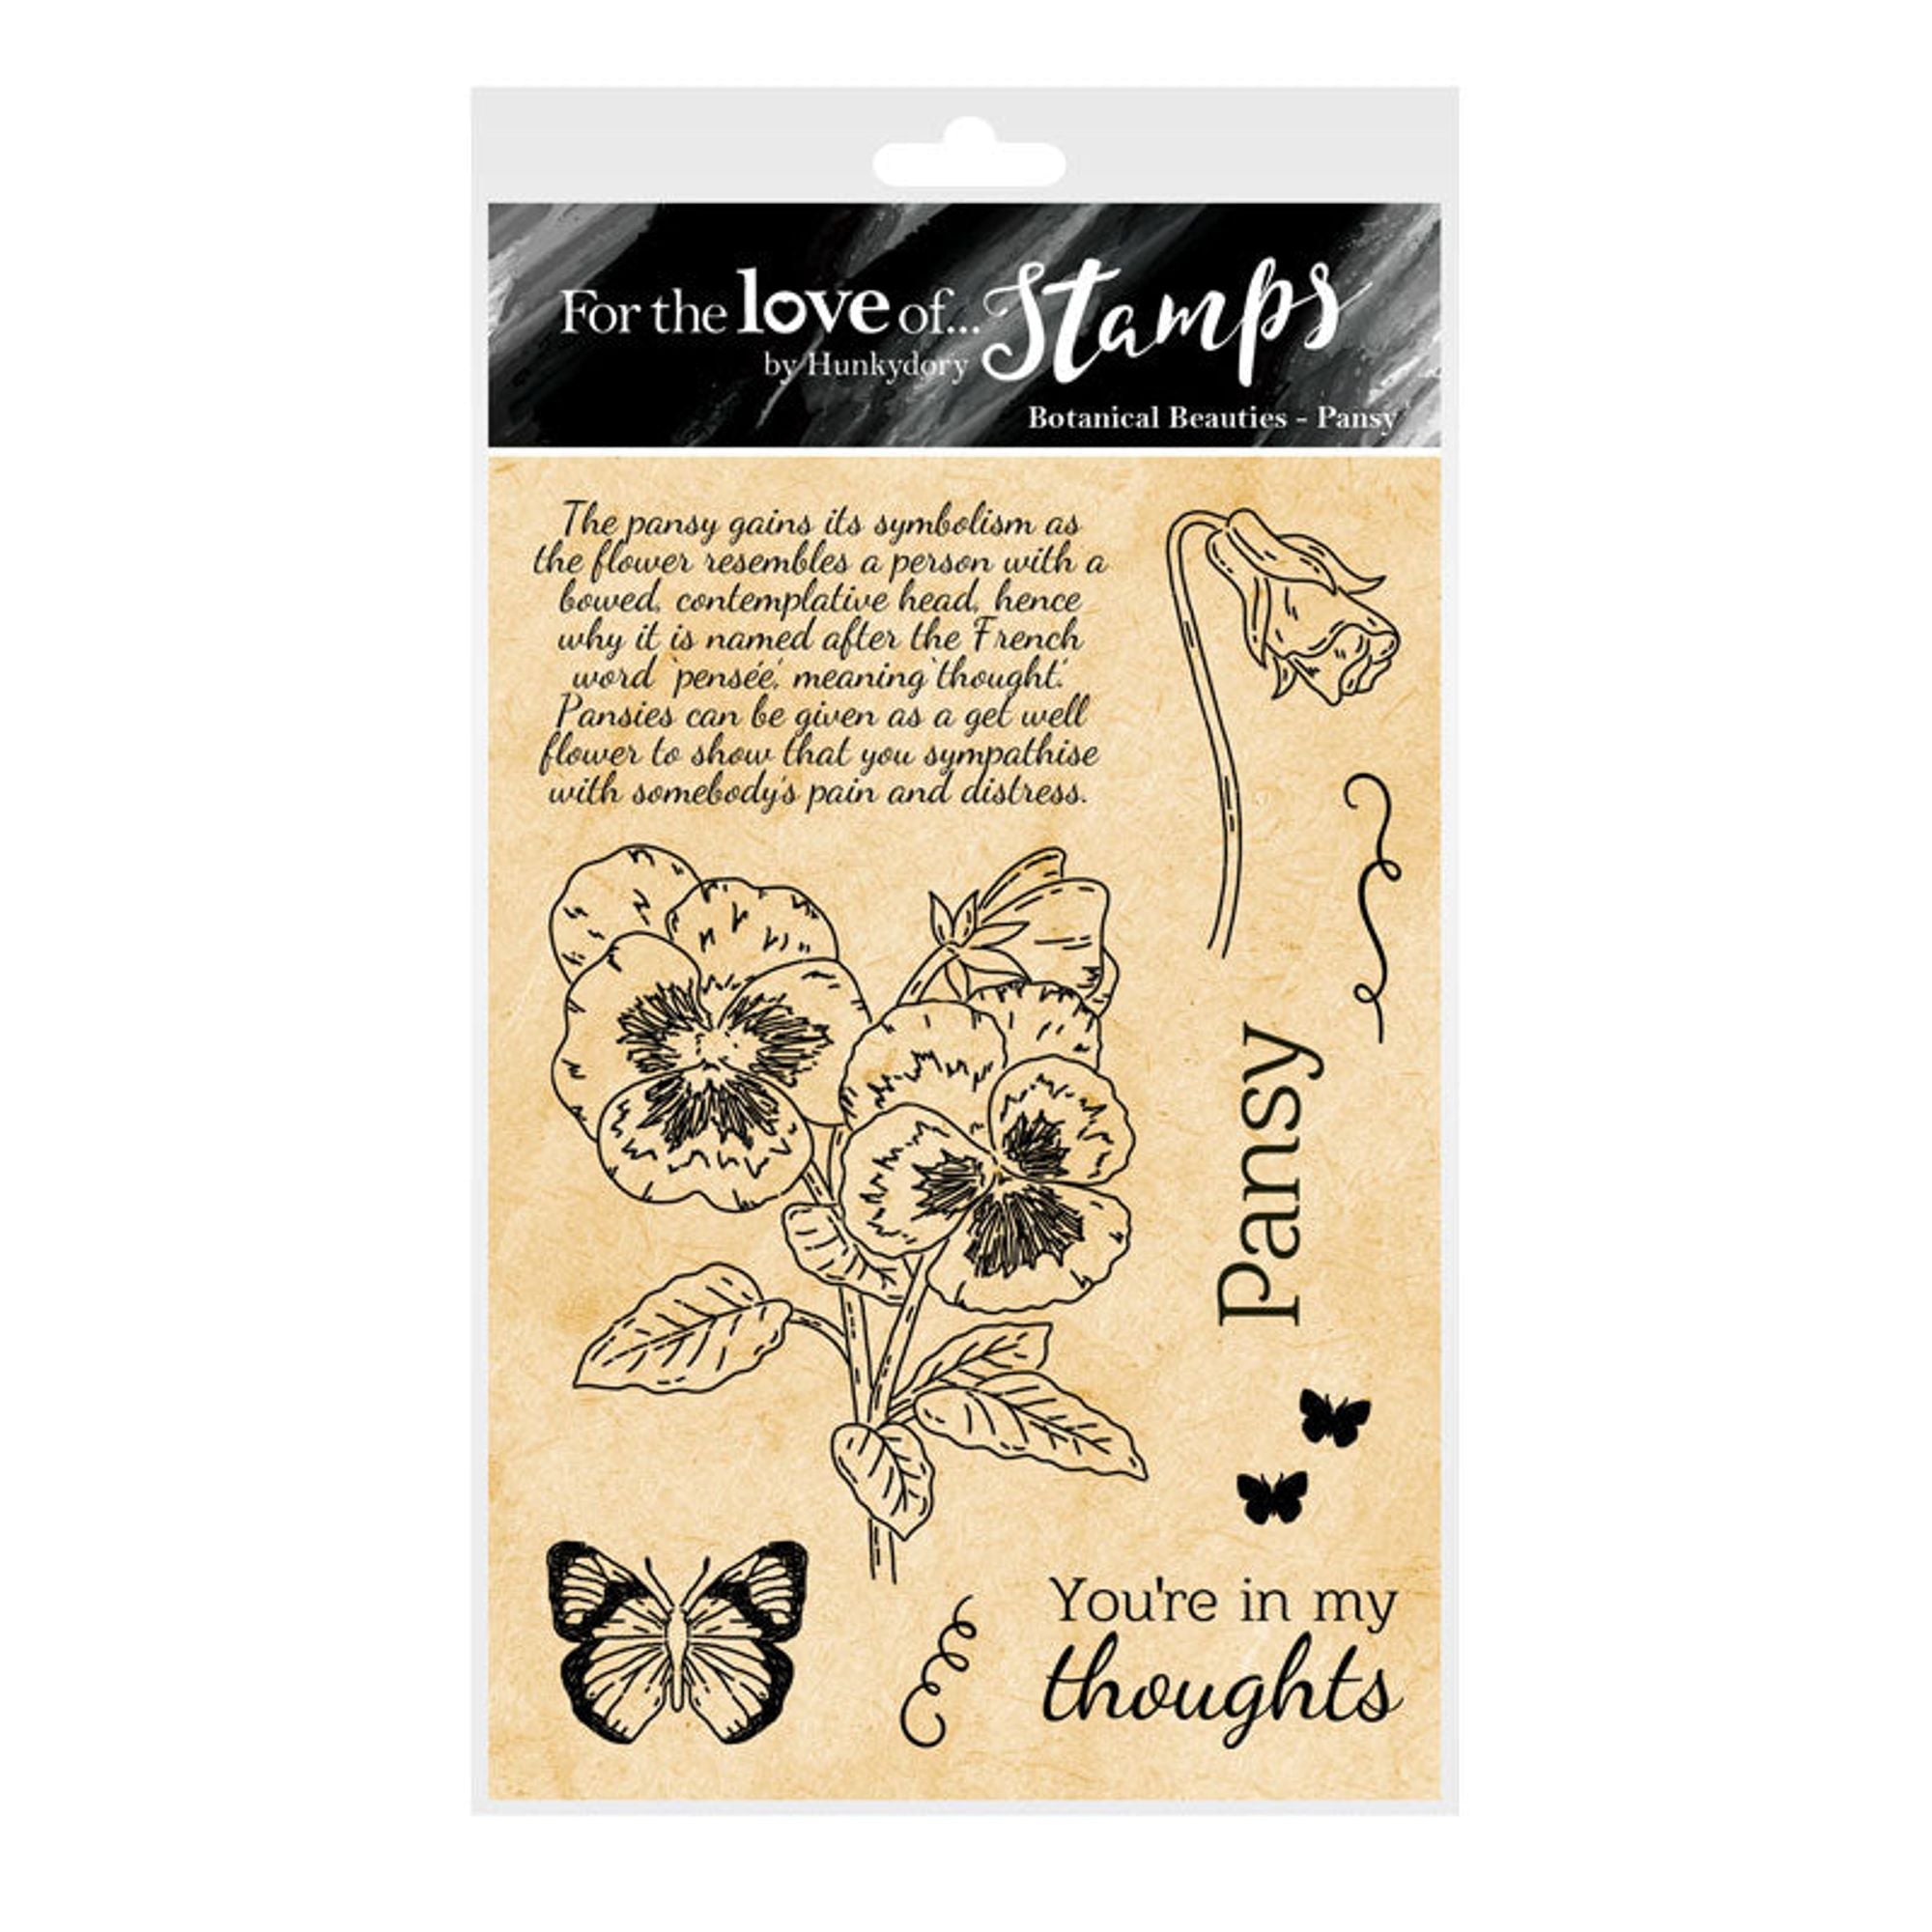 For The Love Of Stamps - Botanical Beauties - Pansy A6 Stamp Set